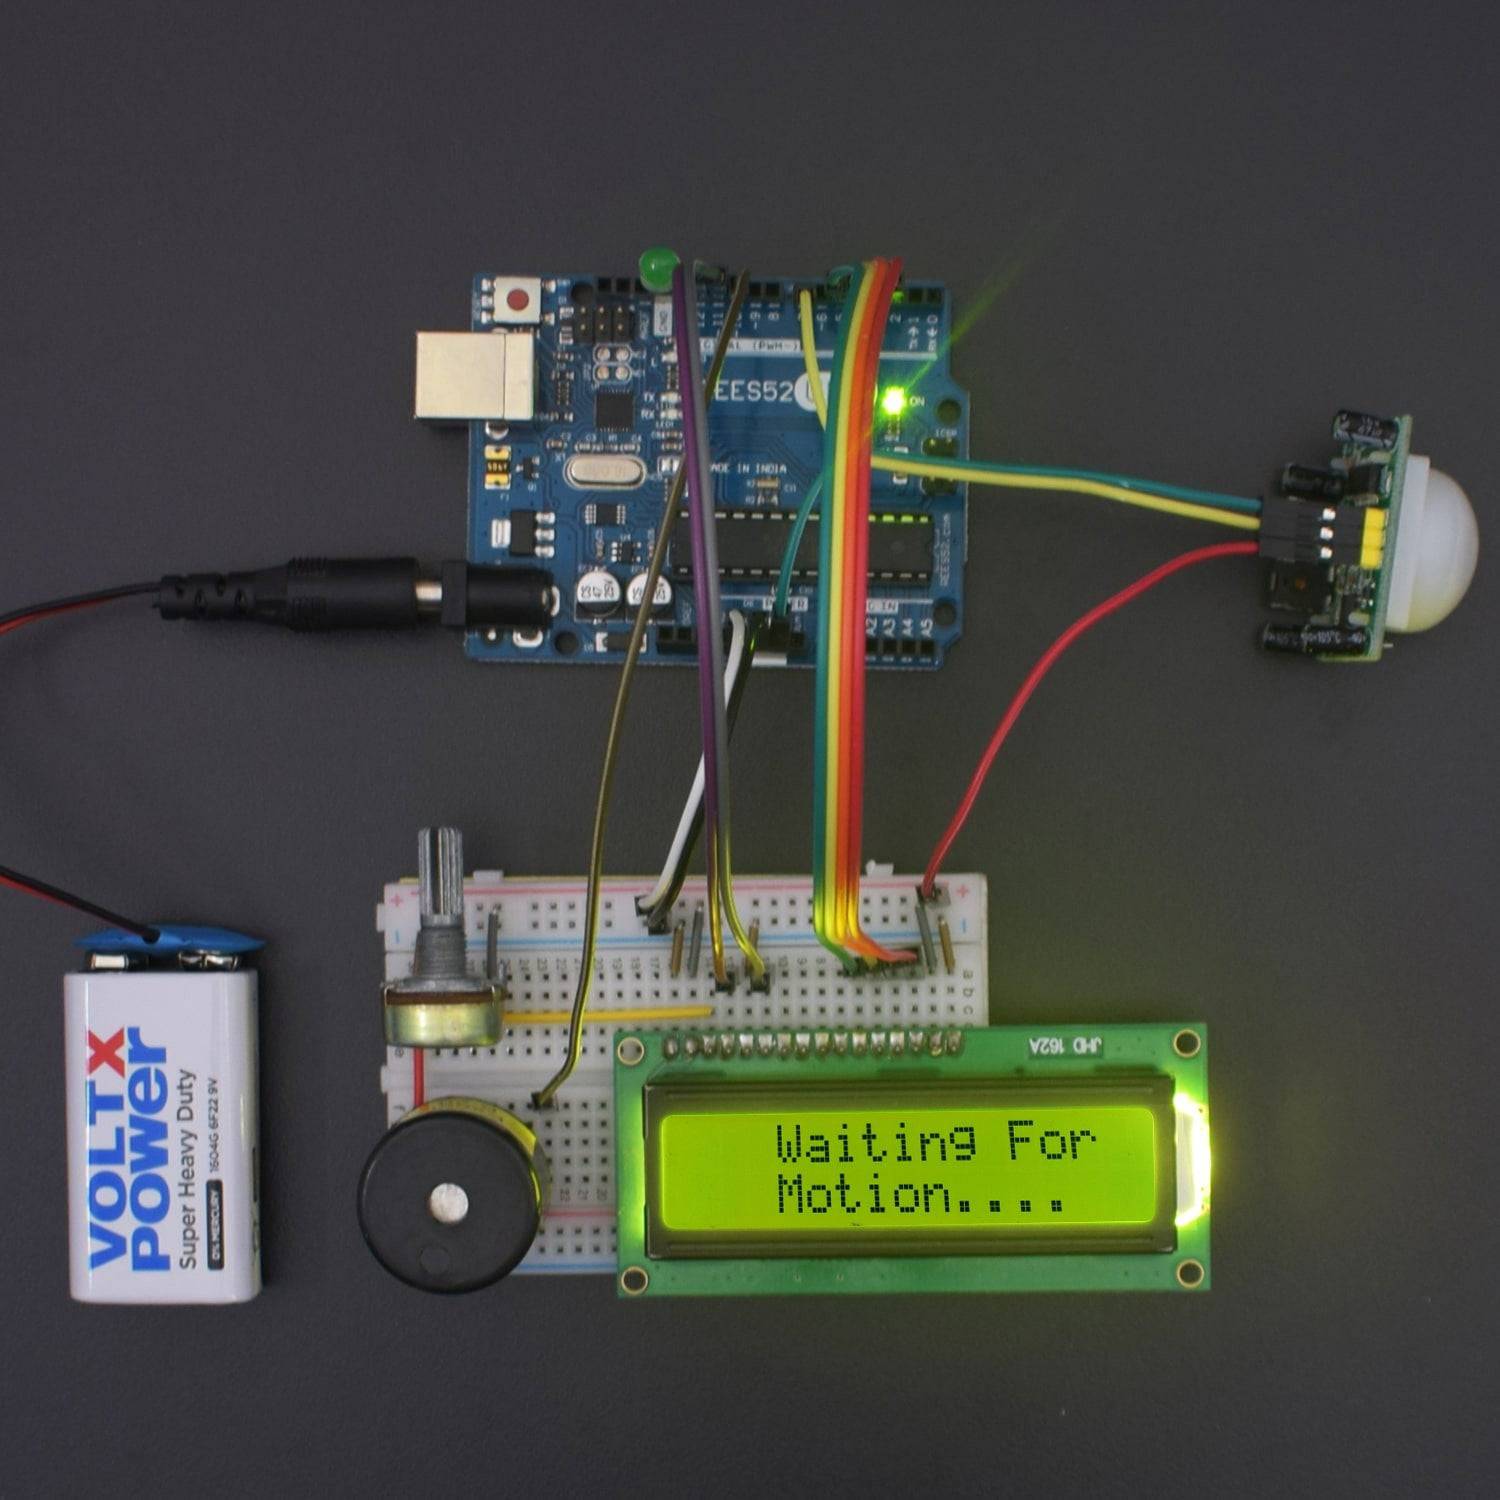 Make a home automation system using PIR Sensor with Buzzer interfacing with Arduino uno - KT944 - REES52